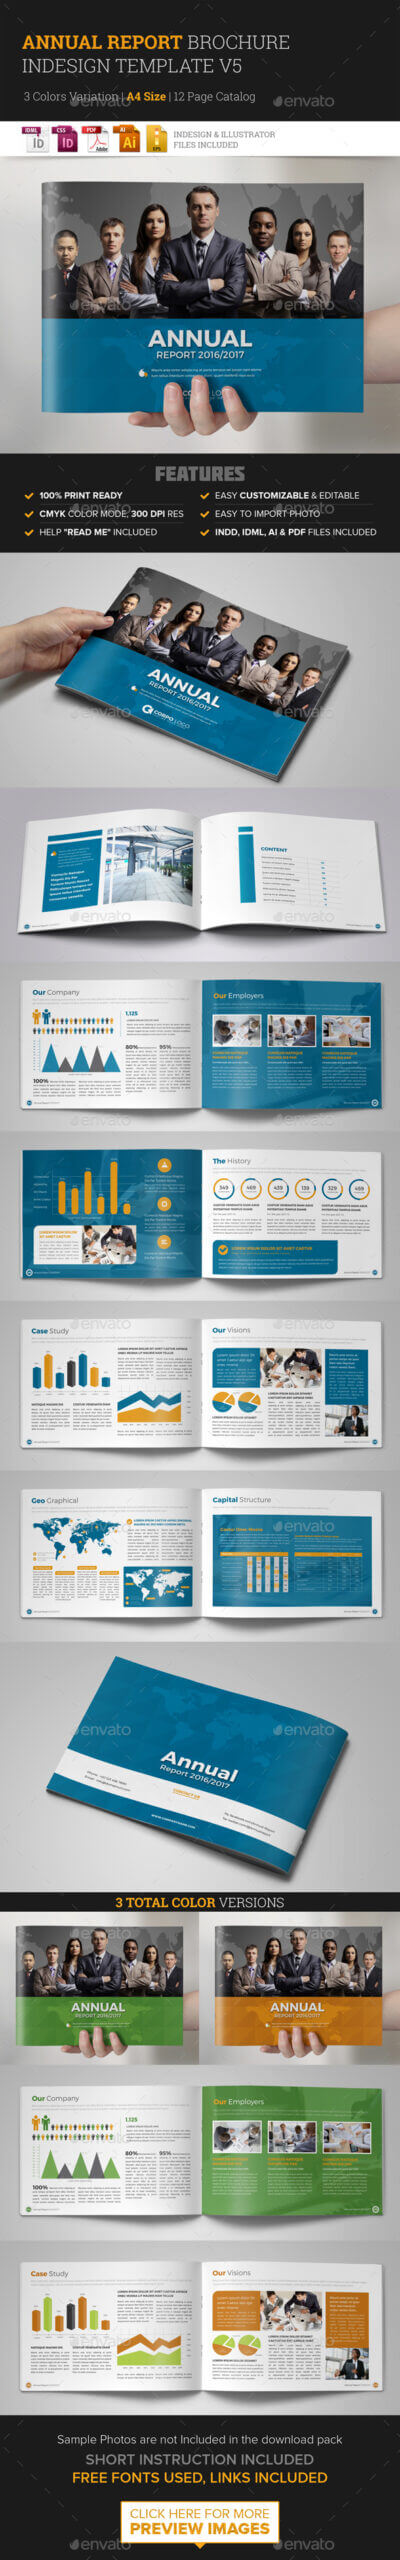 Annual Report Template Indesign Graphics, Designs & Templates Within Free Annual Report Template Indesign